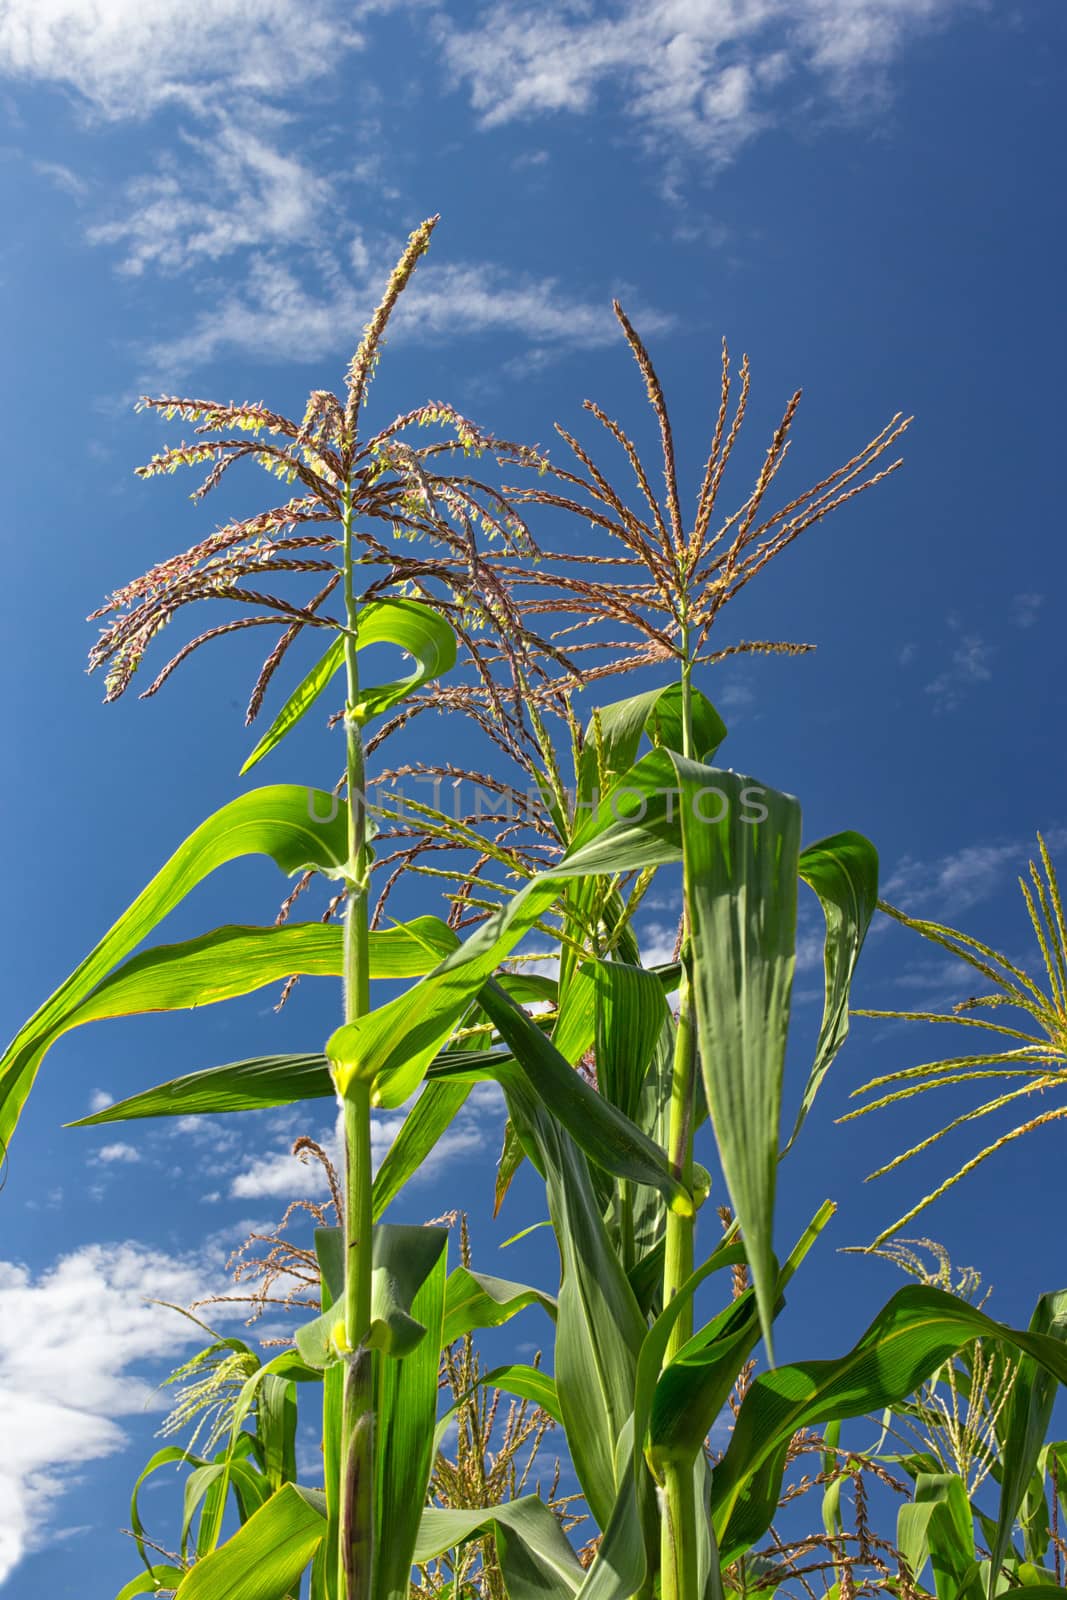 Tall Corn Ready to Harvest by wolterk